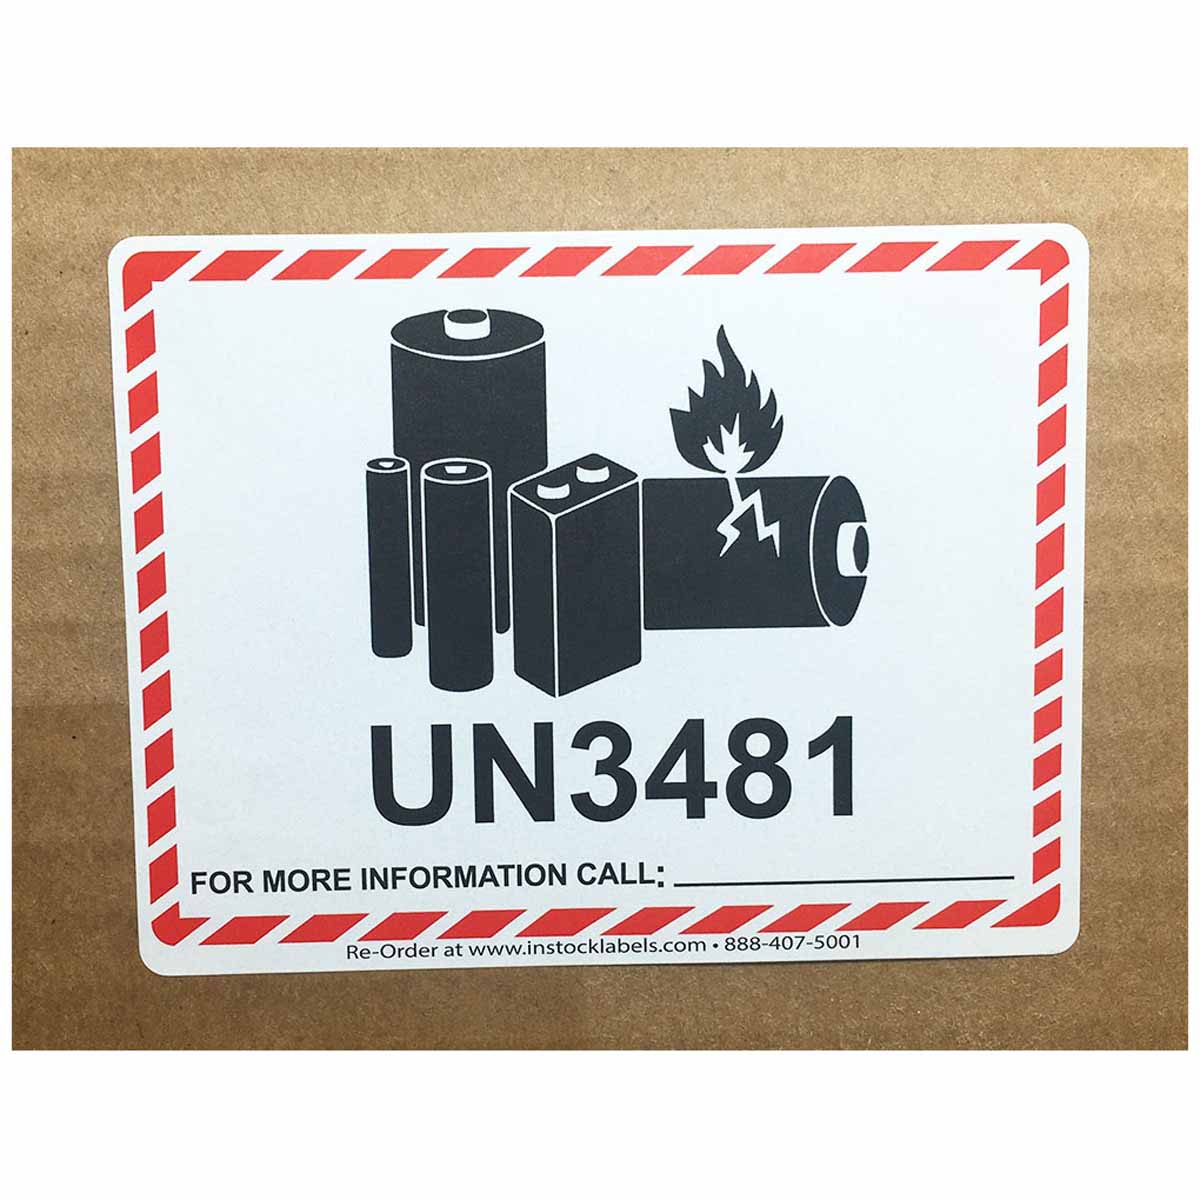 UN3481 BATTERY SHIPPING WARNING LABELS  4.5" x 5"  1000 LABELS UN 3481 